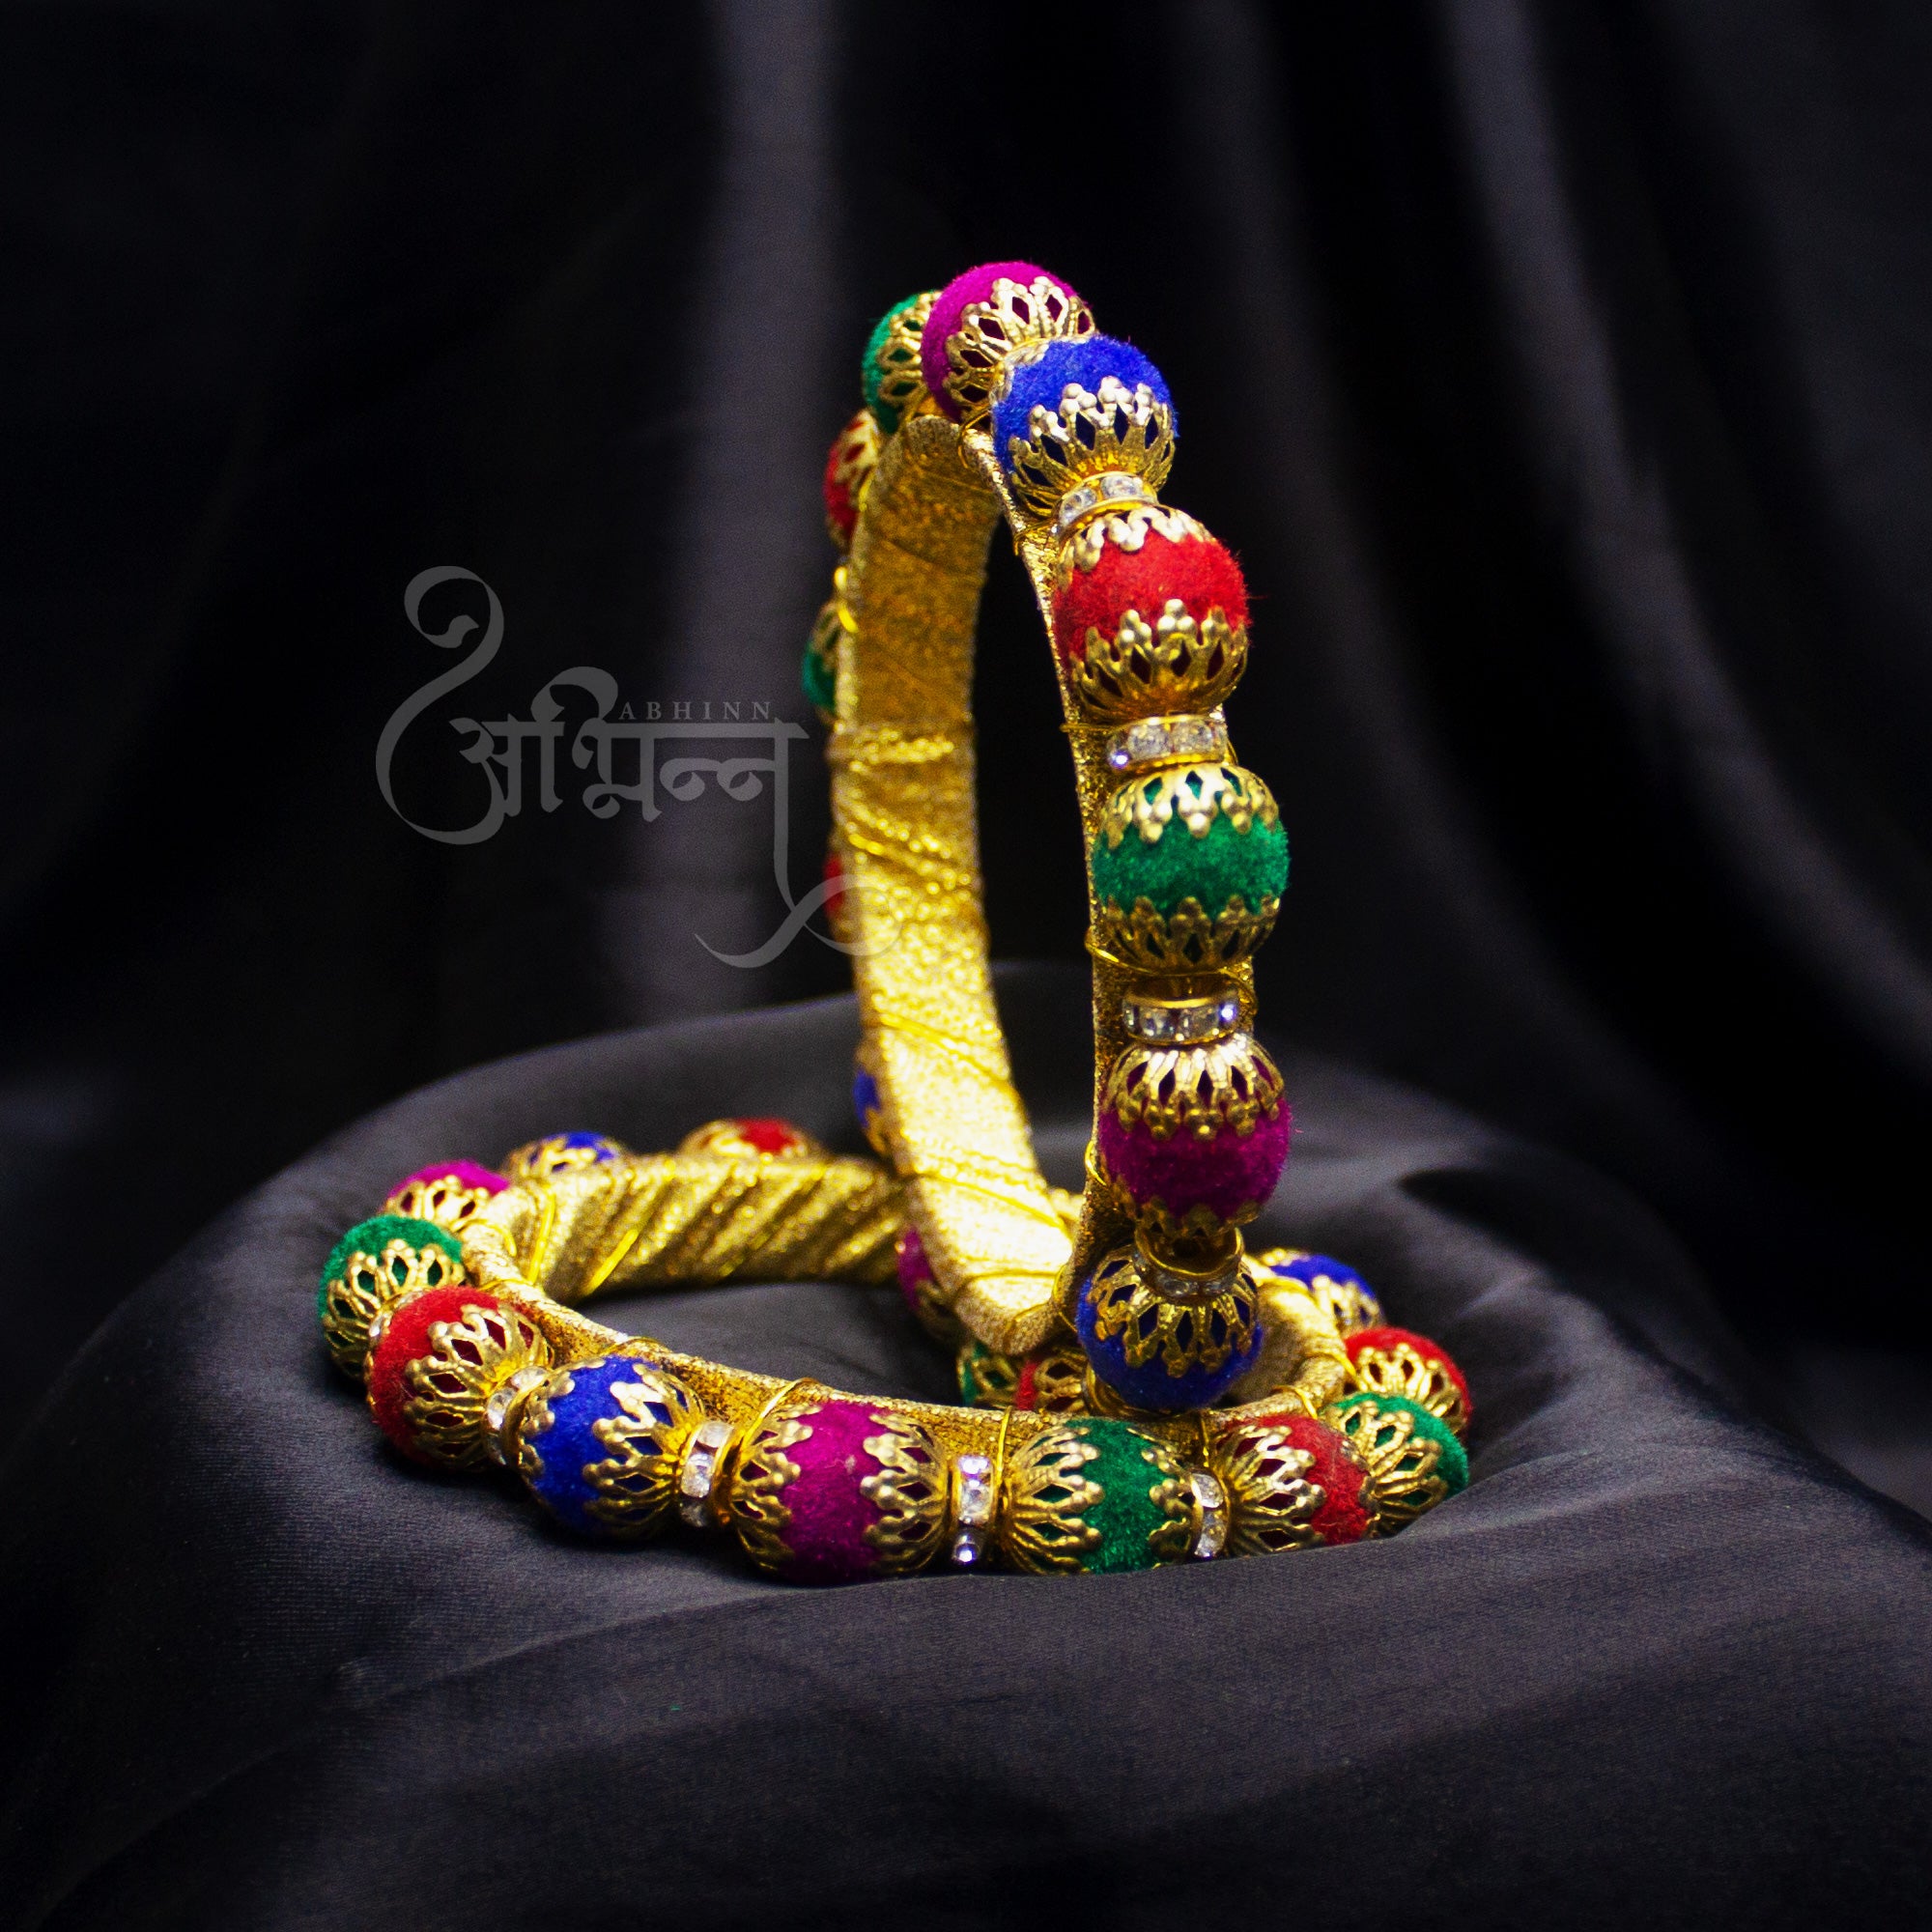 Abhinn Handicrafted Bangle Set Stringed With Multi Coloured Cotton Balls For Women 